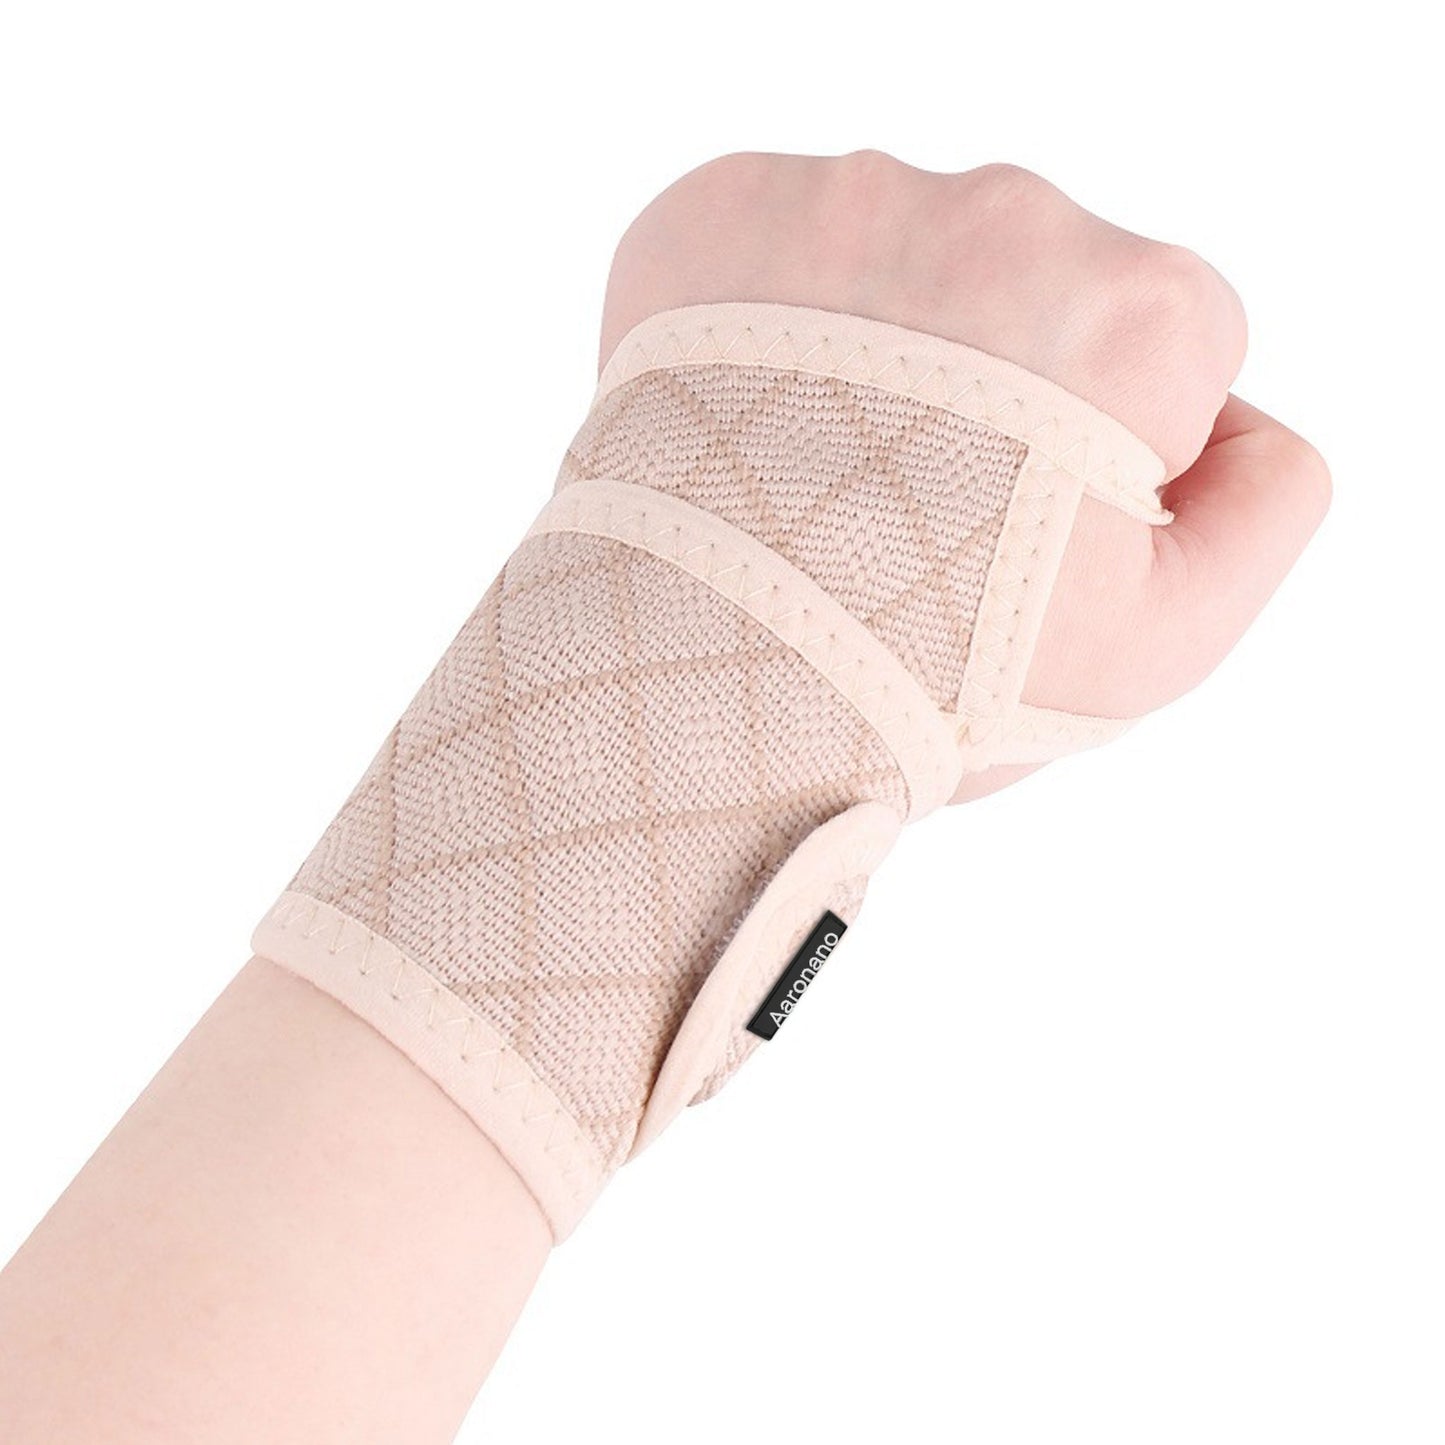 AARONANO Wrist Guards For Athletic Use Wrist Thumb Support Compression Gloves Single